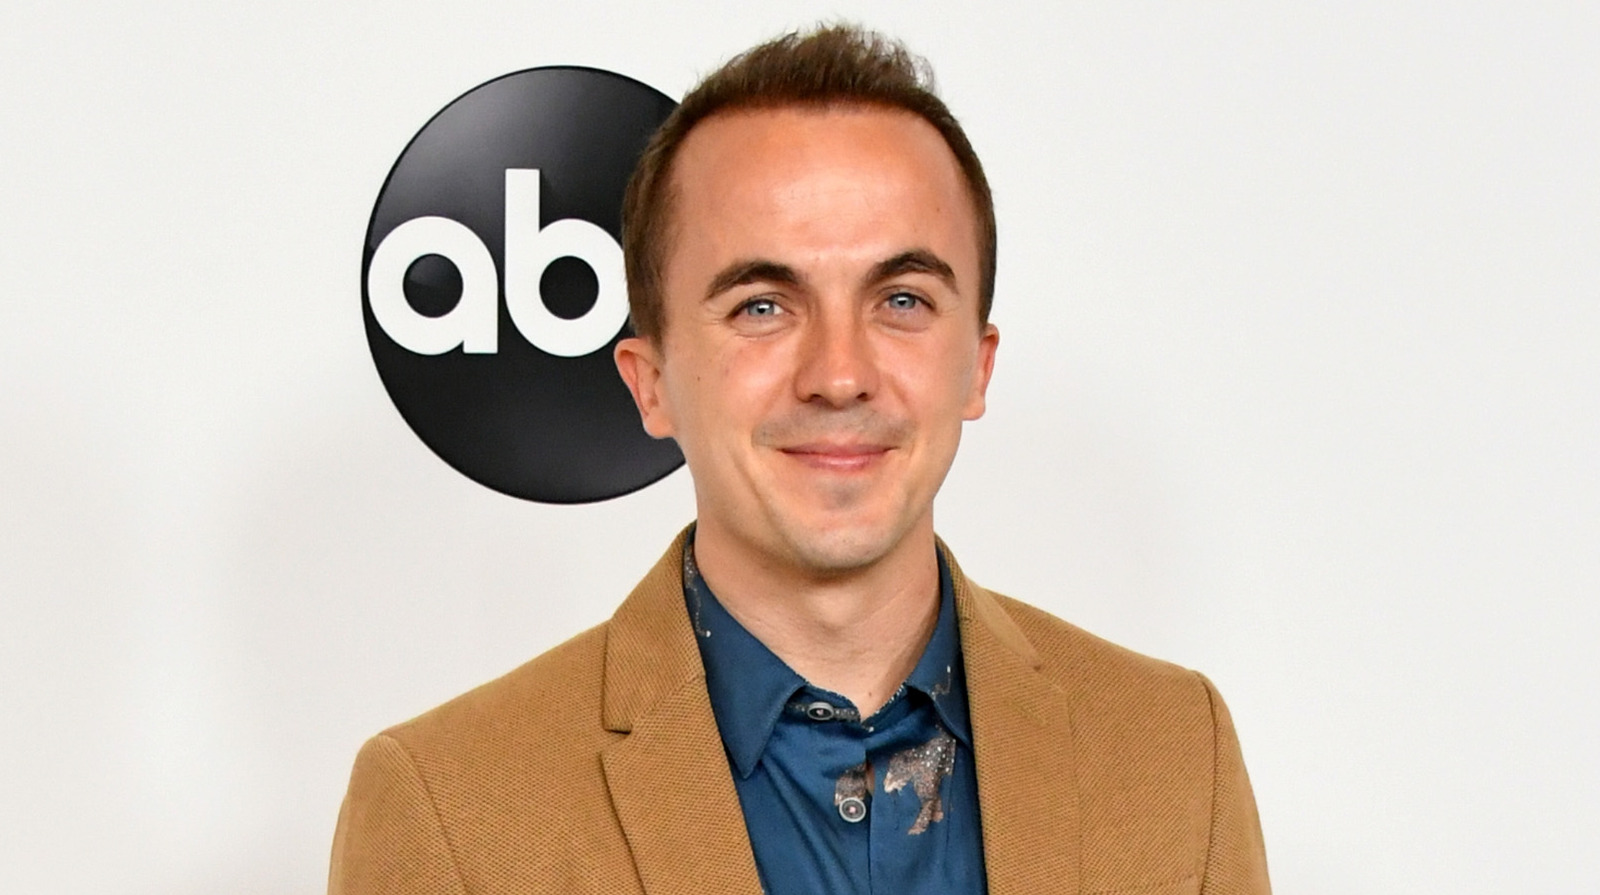 Why Child Star Frankie Muniz Made The Move To Racecar Driving